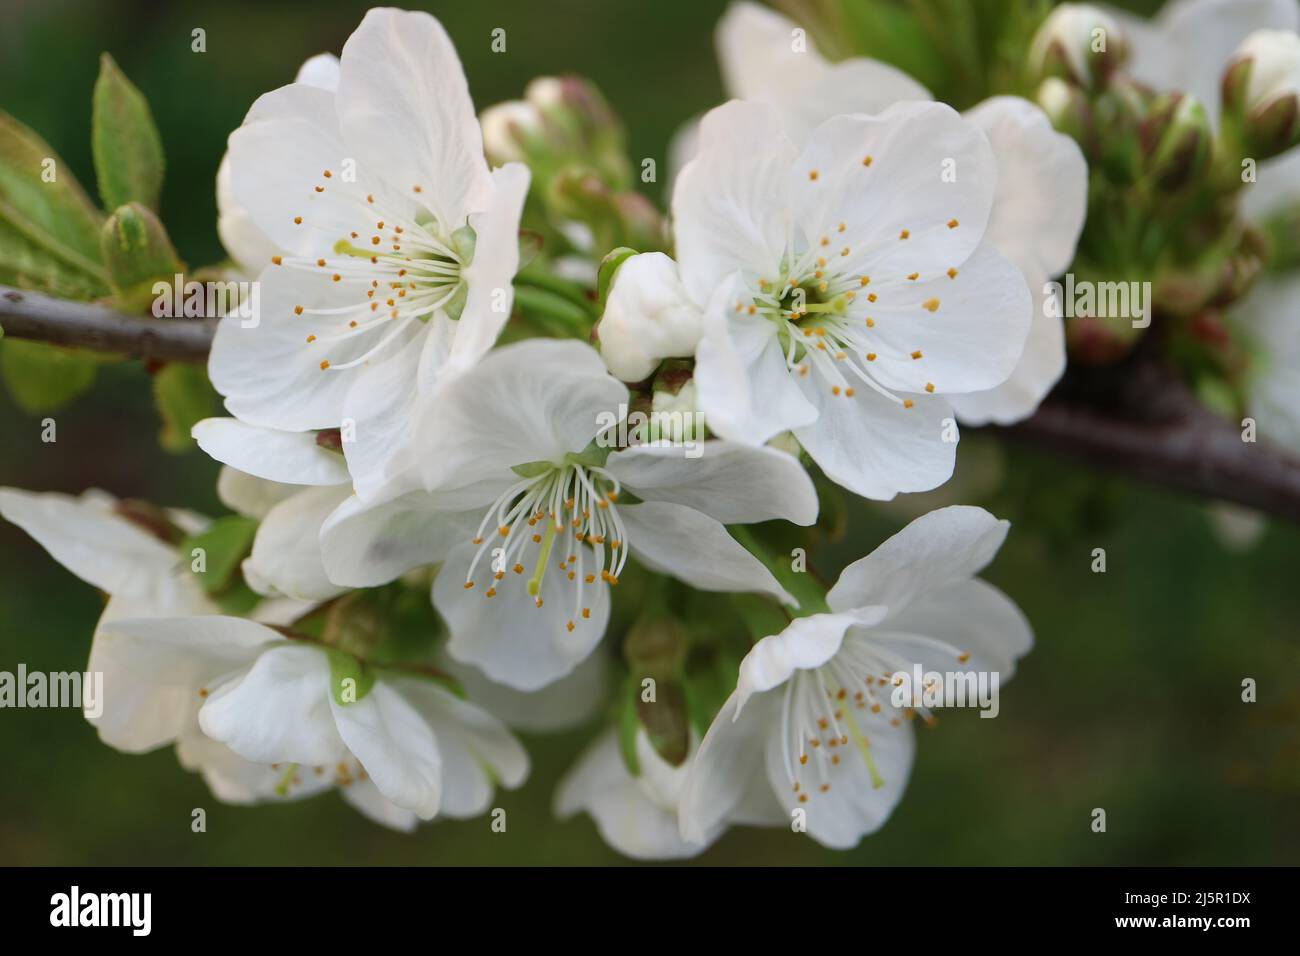 White cherry  blossoms  with soft petals and stamens, cherry blossoms branch , spring flowers, cherry  blossoms macro , beauty in nature, floral photo Stock Photo